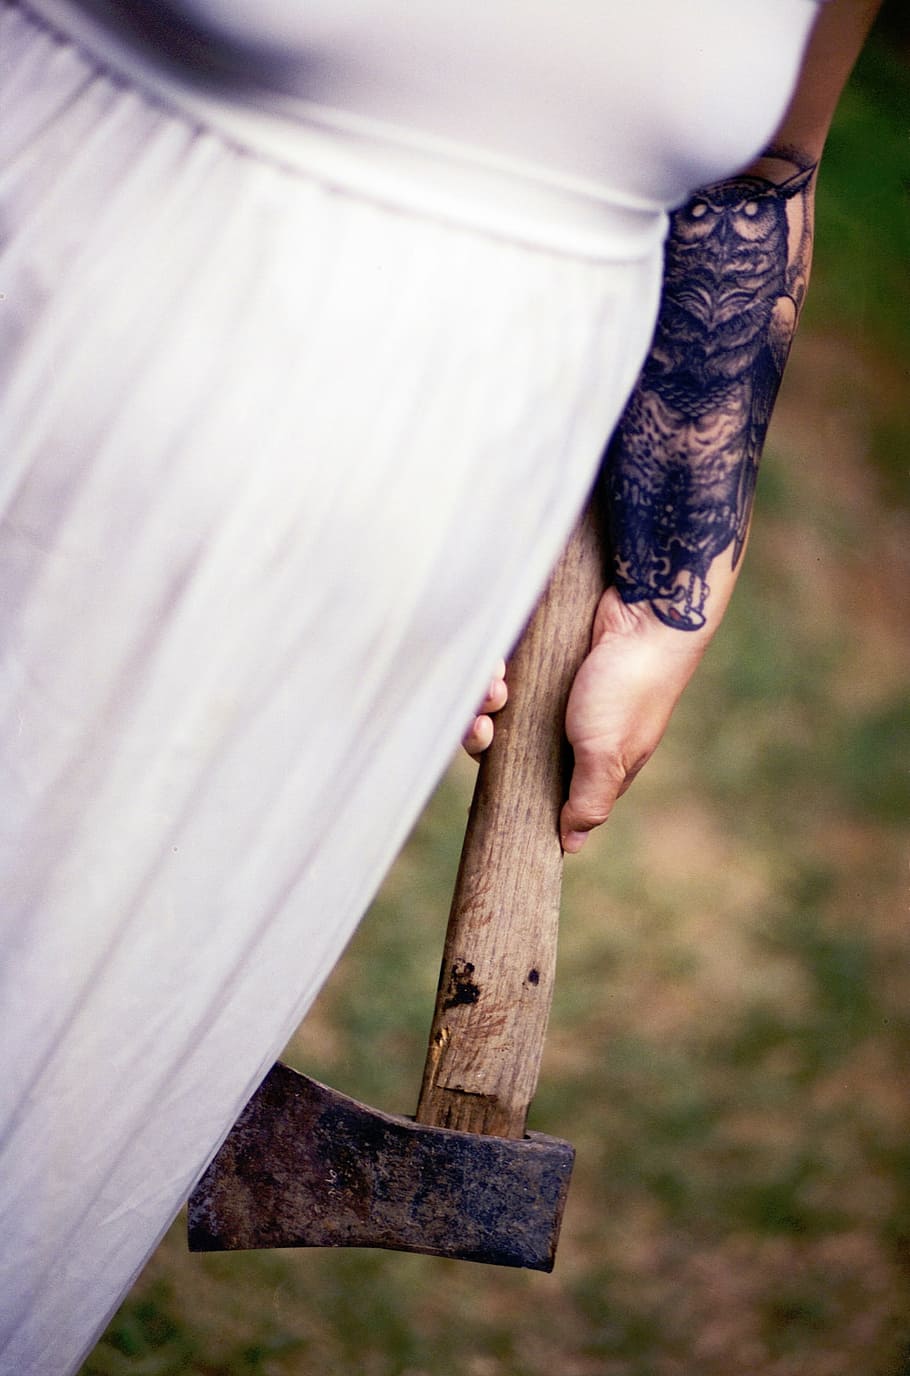 person holding axe, weapon, wood, ax, people, hand, owl, tattoo, human hand, one person